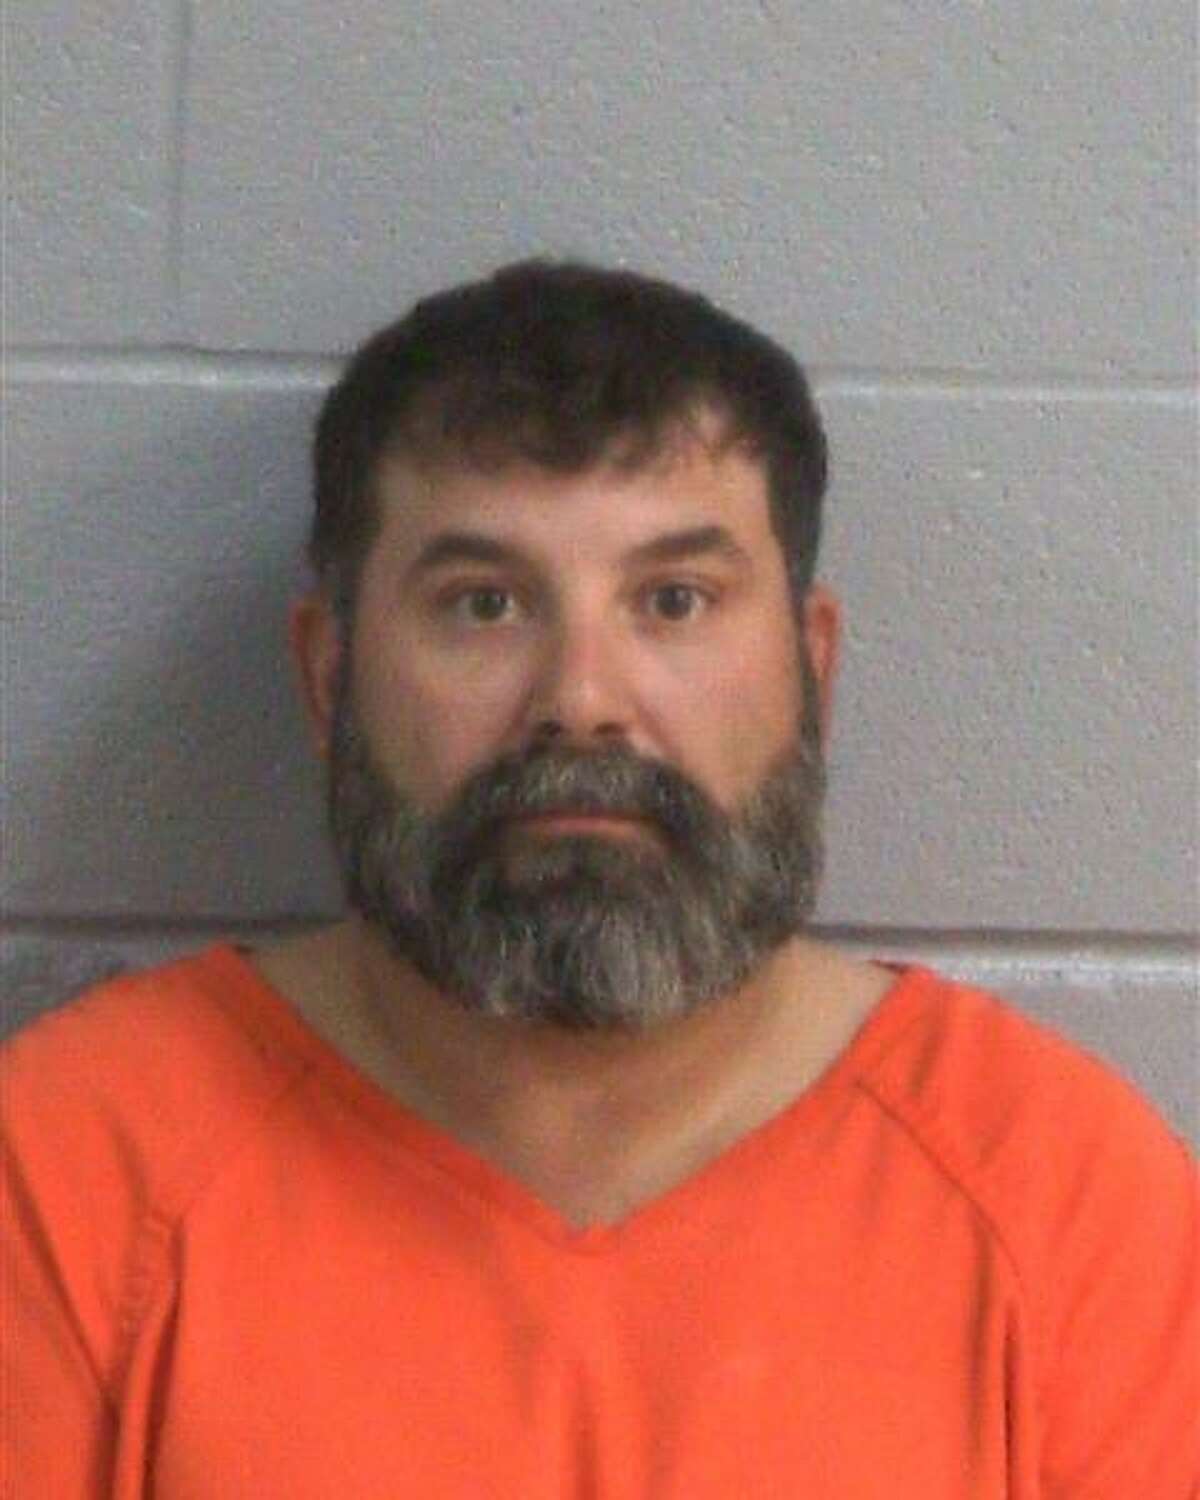 John A. Trahan, 39, was charged with possession or promotion of child pornography, third-degree felony charge.